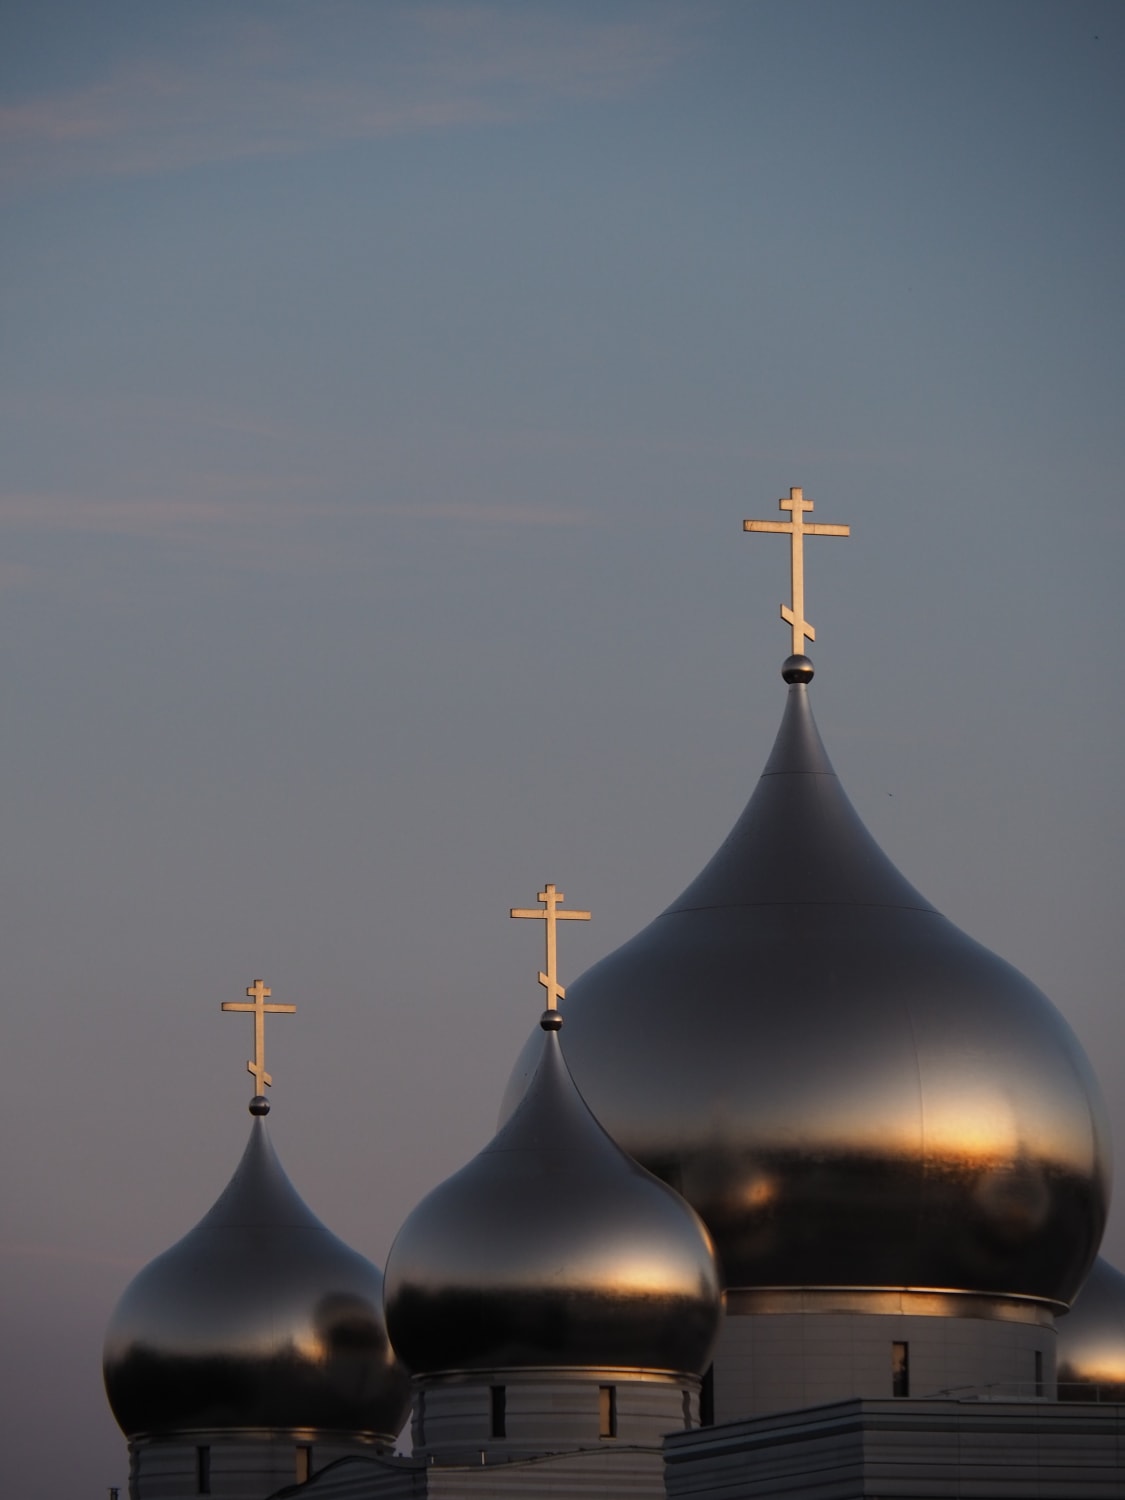 The dome of Holy Trinity Cathedral and the Russian Orthodox Spiritual and Cultural Center in #Paris